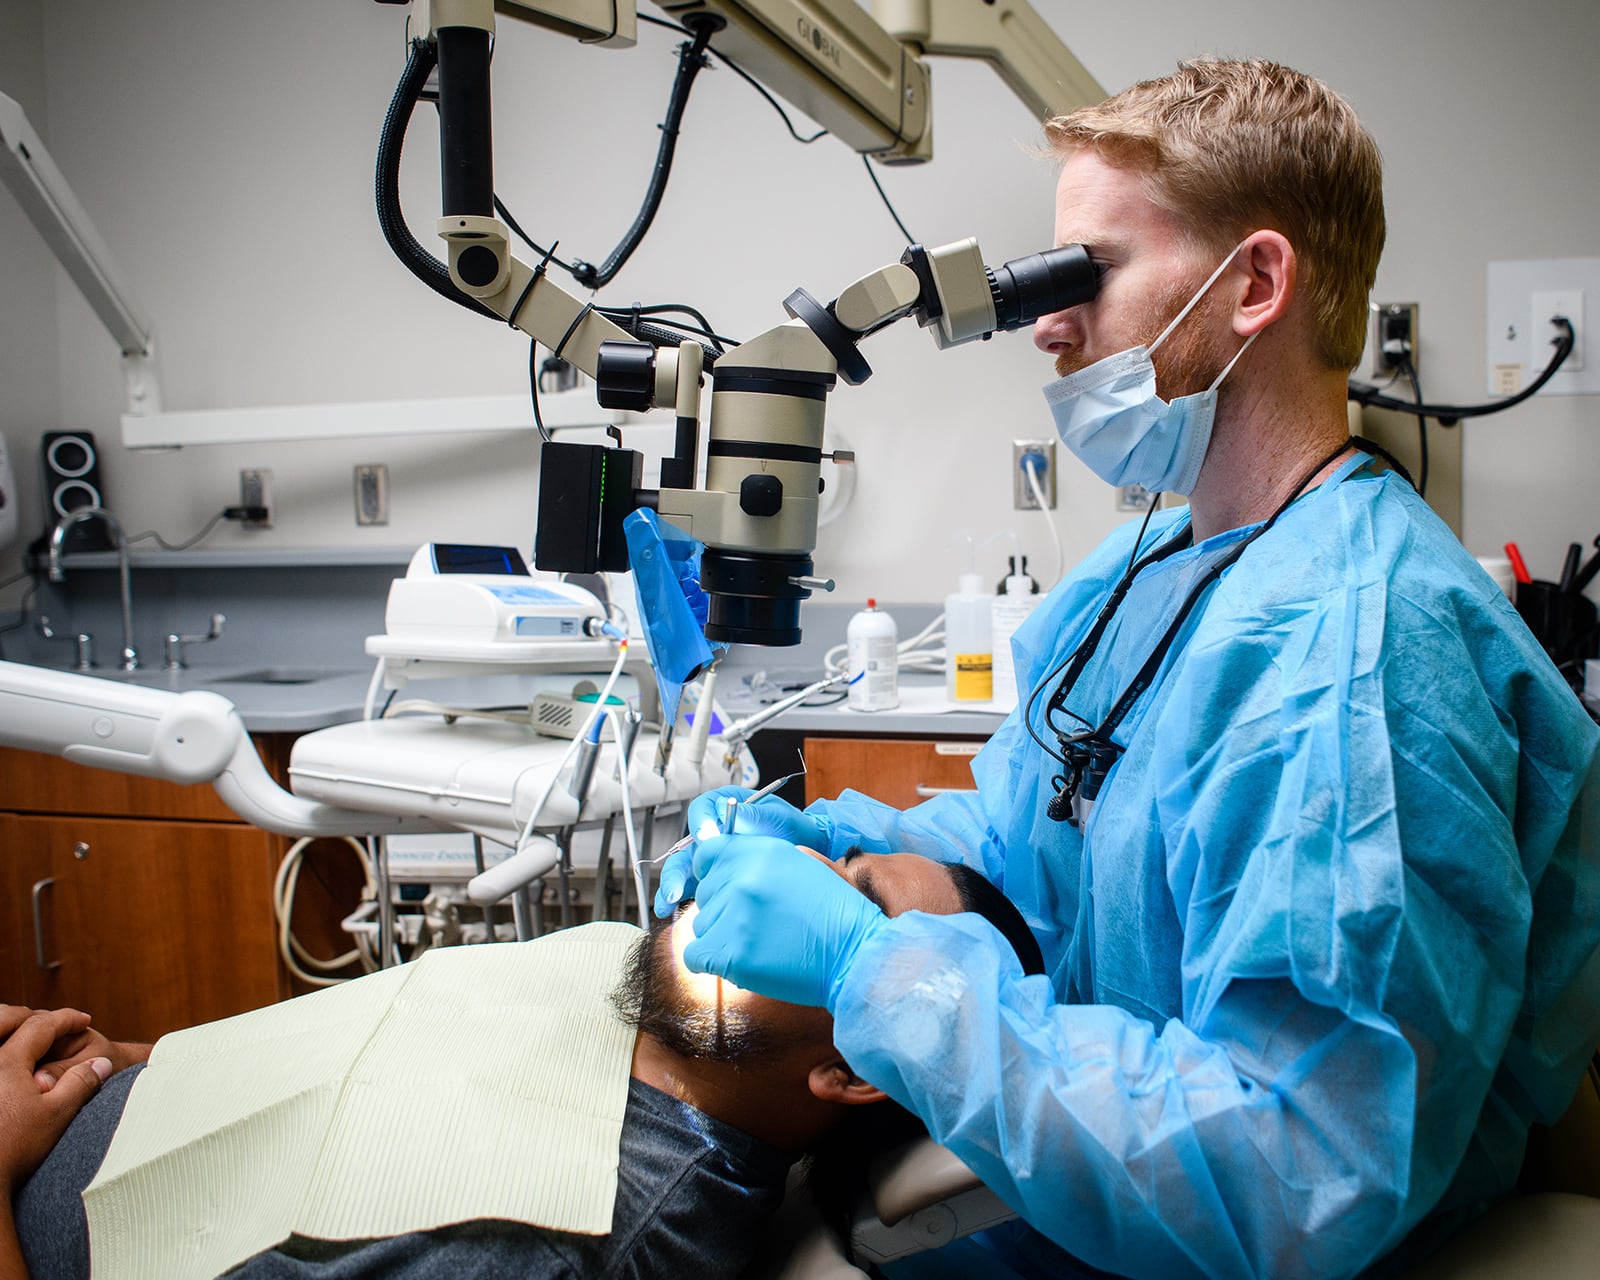 Dentist looking through magnifying device while working in a patient's mouth.